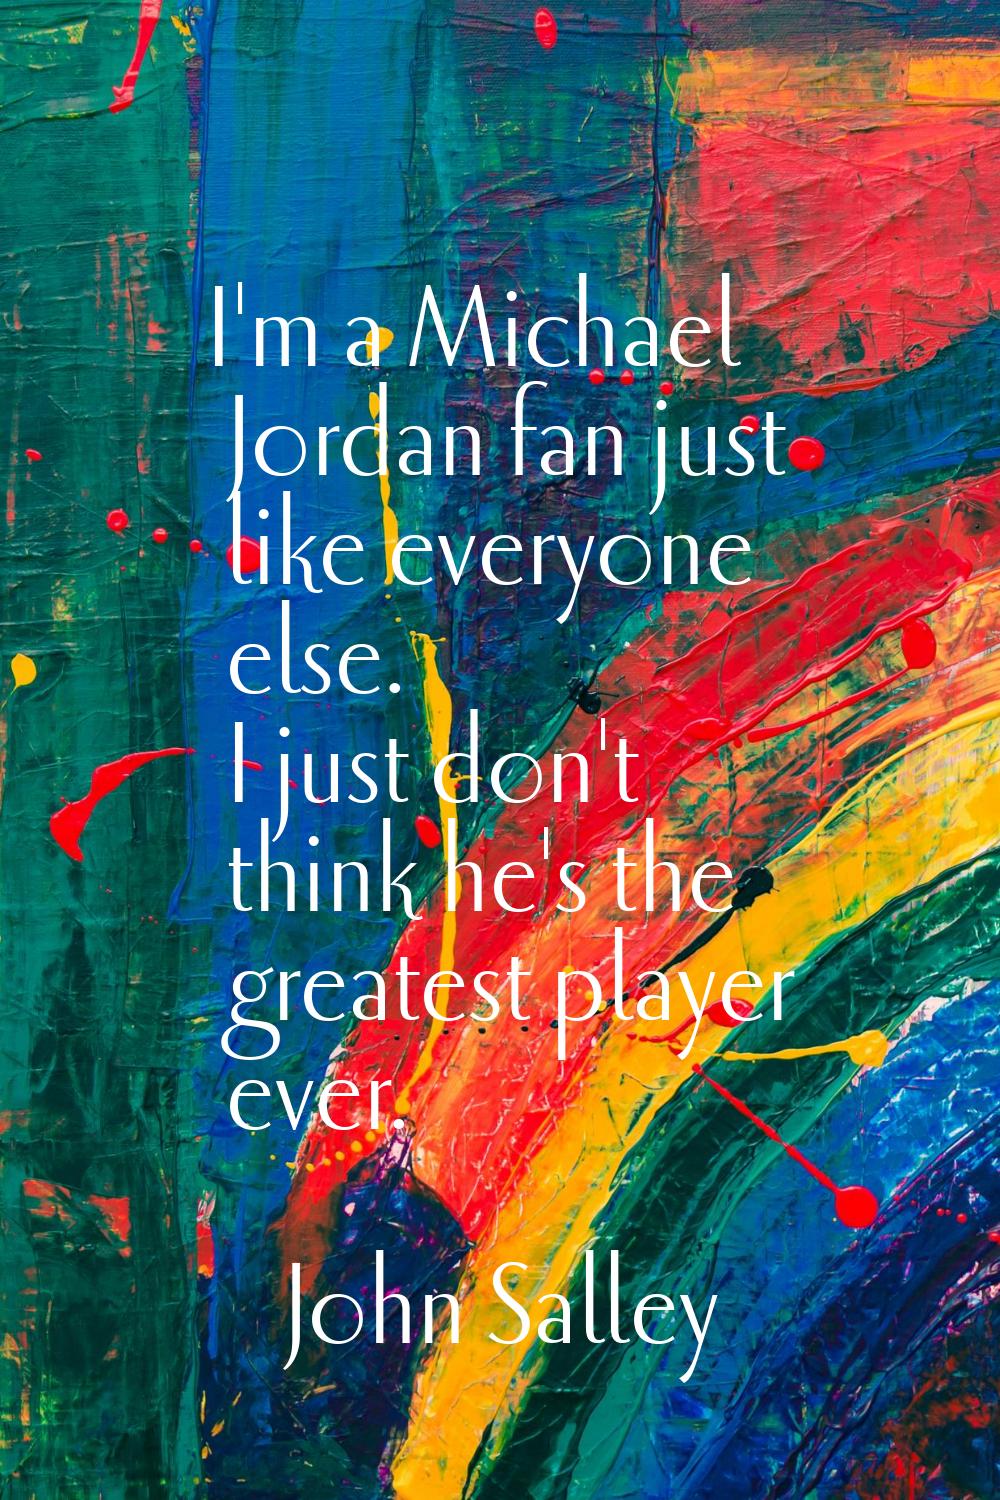 I'm a Michael Jordan fan just like everyone else. I just don't think he's the greatest player ever.